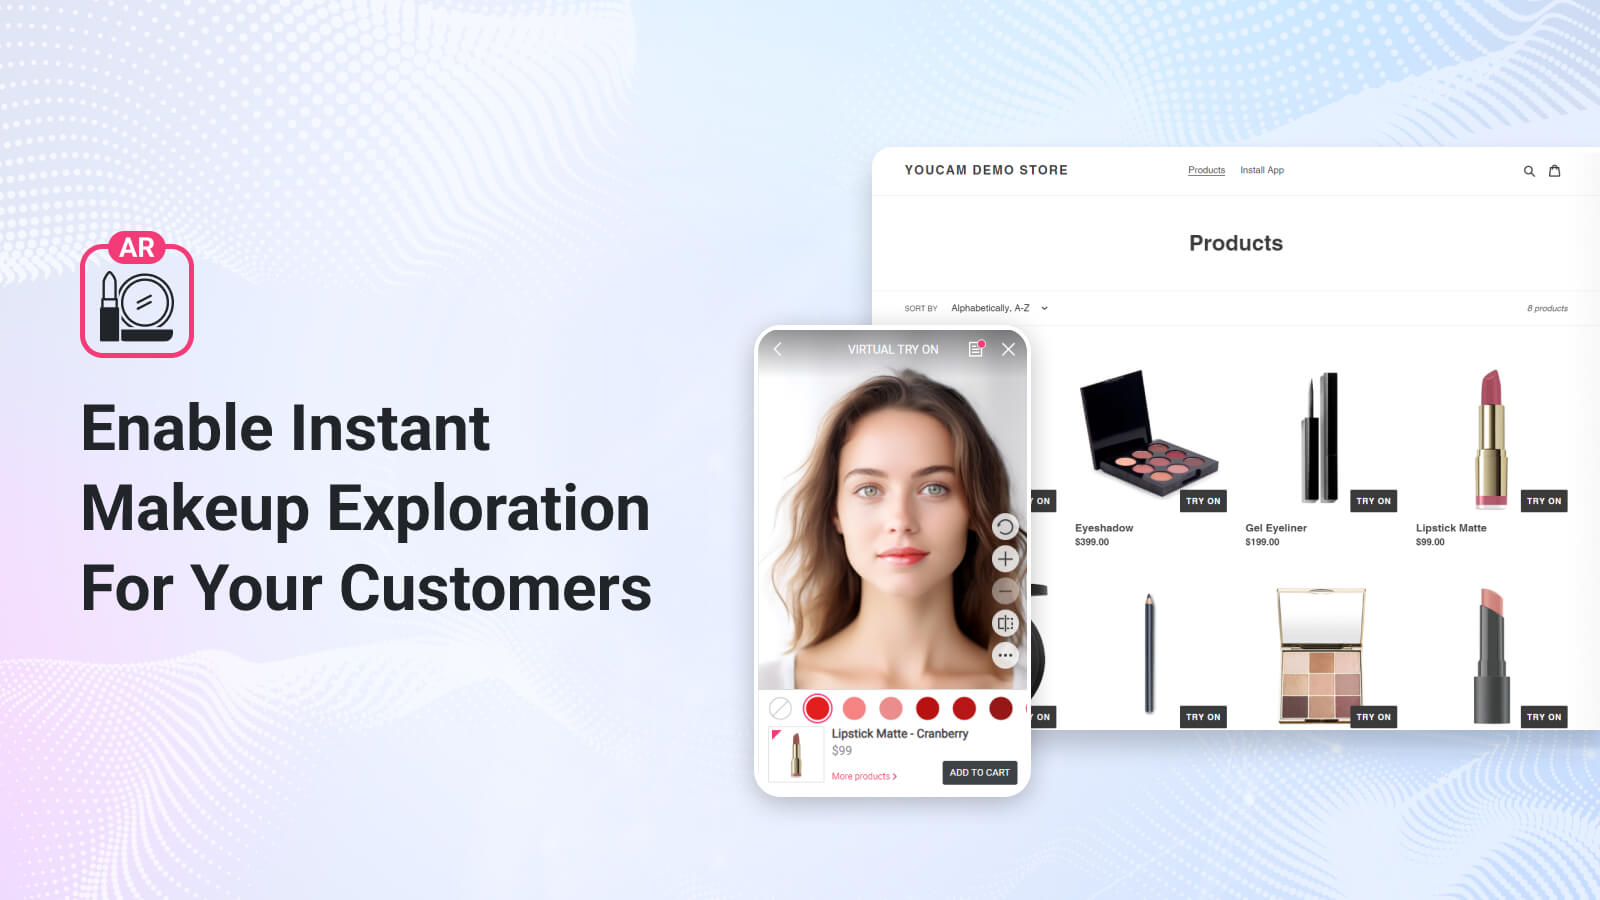 Enable Instant Makeup Exploration For Your Customers